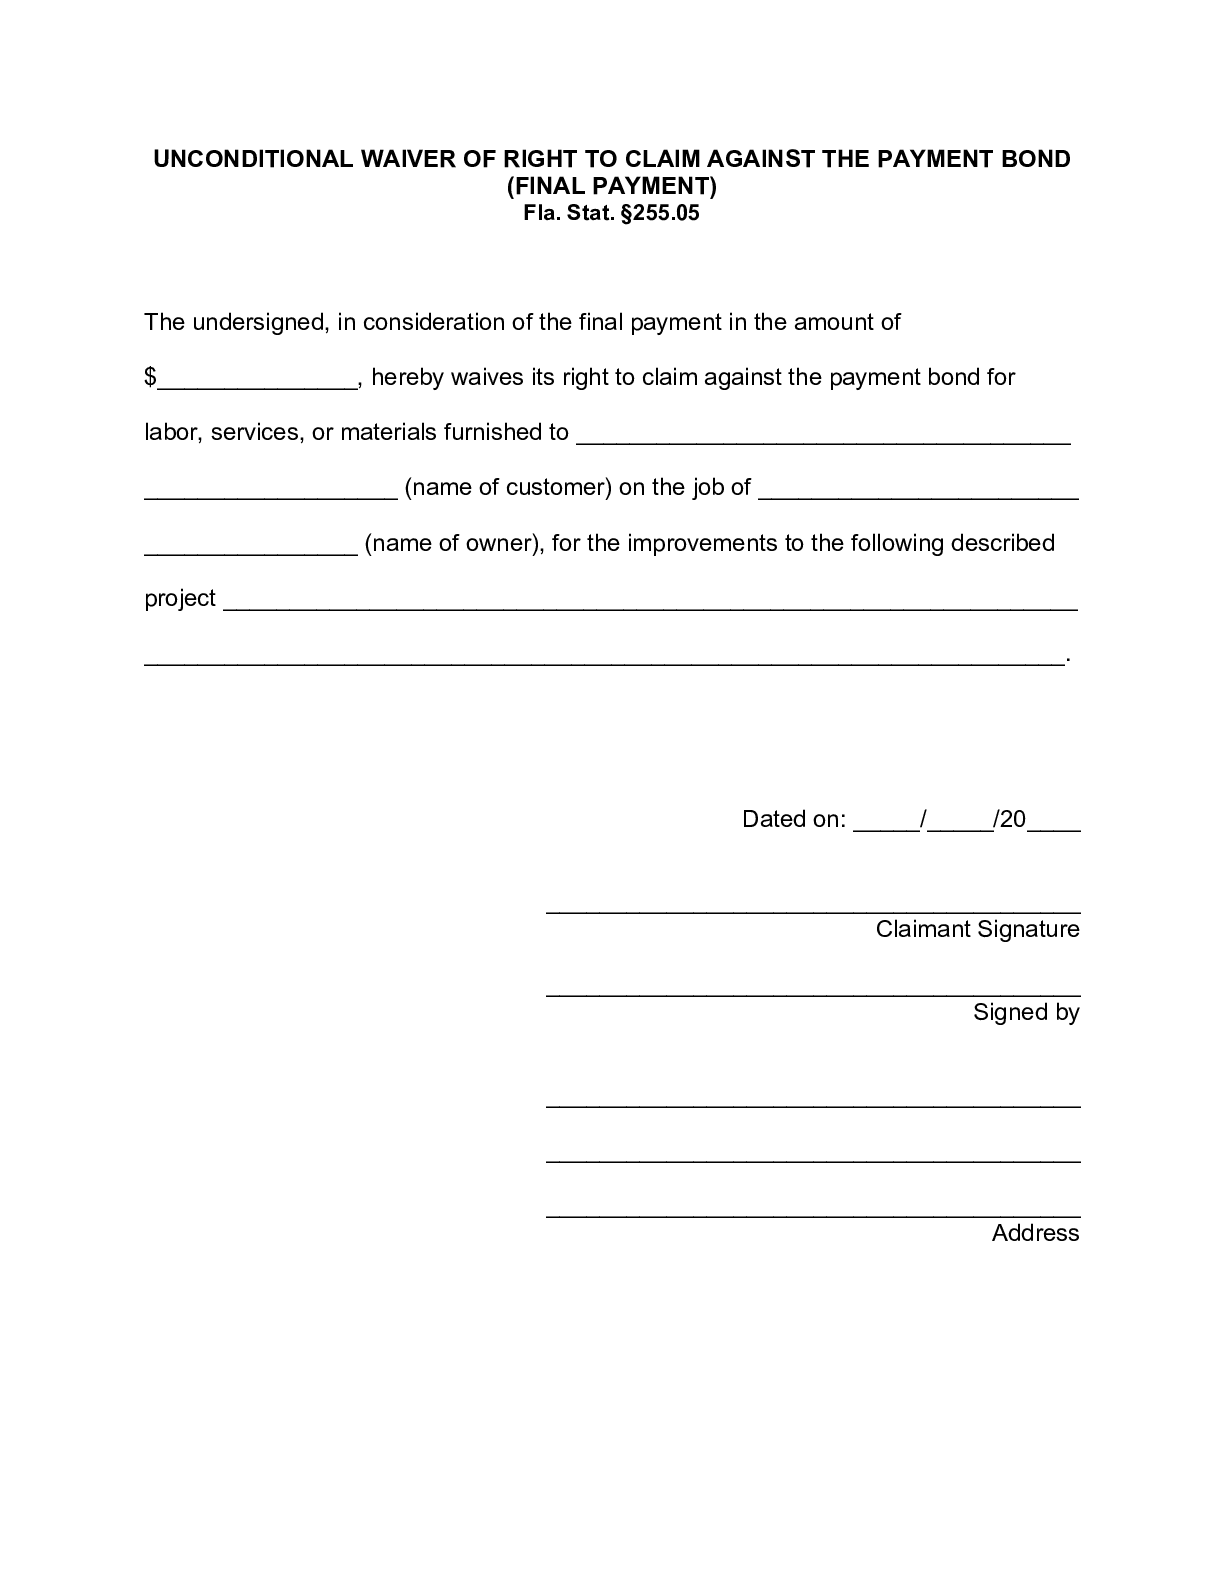 Florida Final Unconditional Bond Waiver Form | Free Template Download - free from